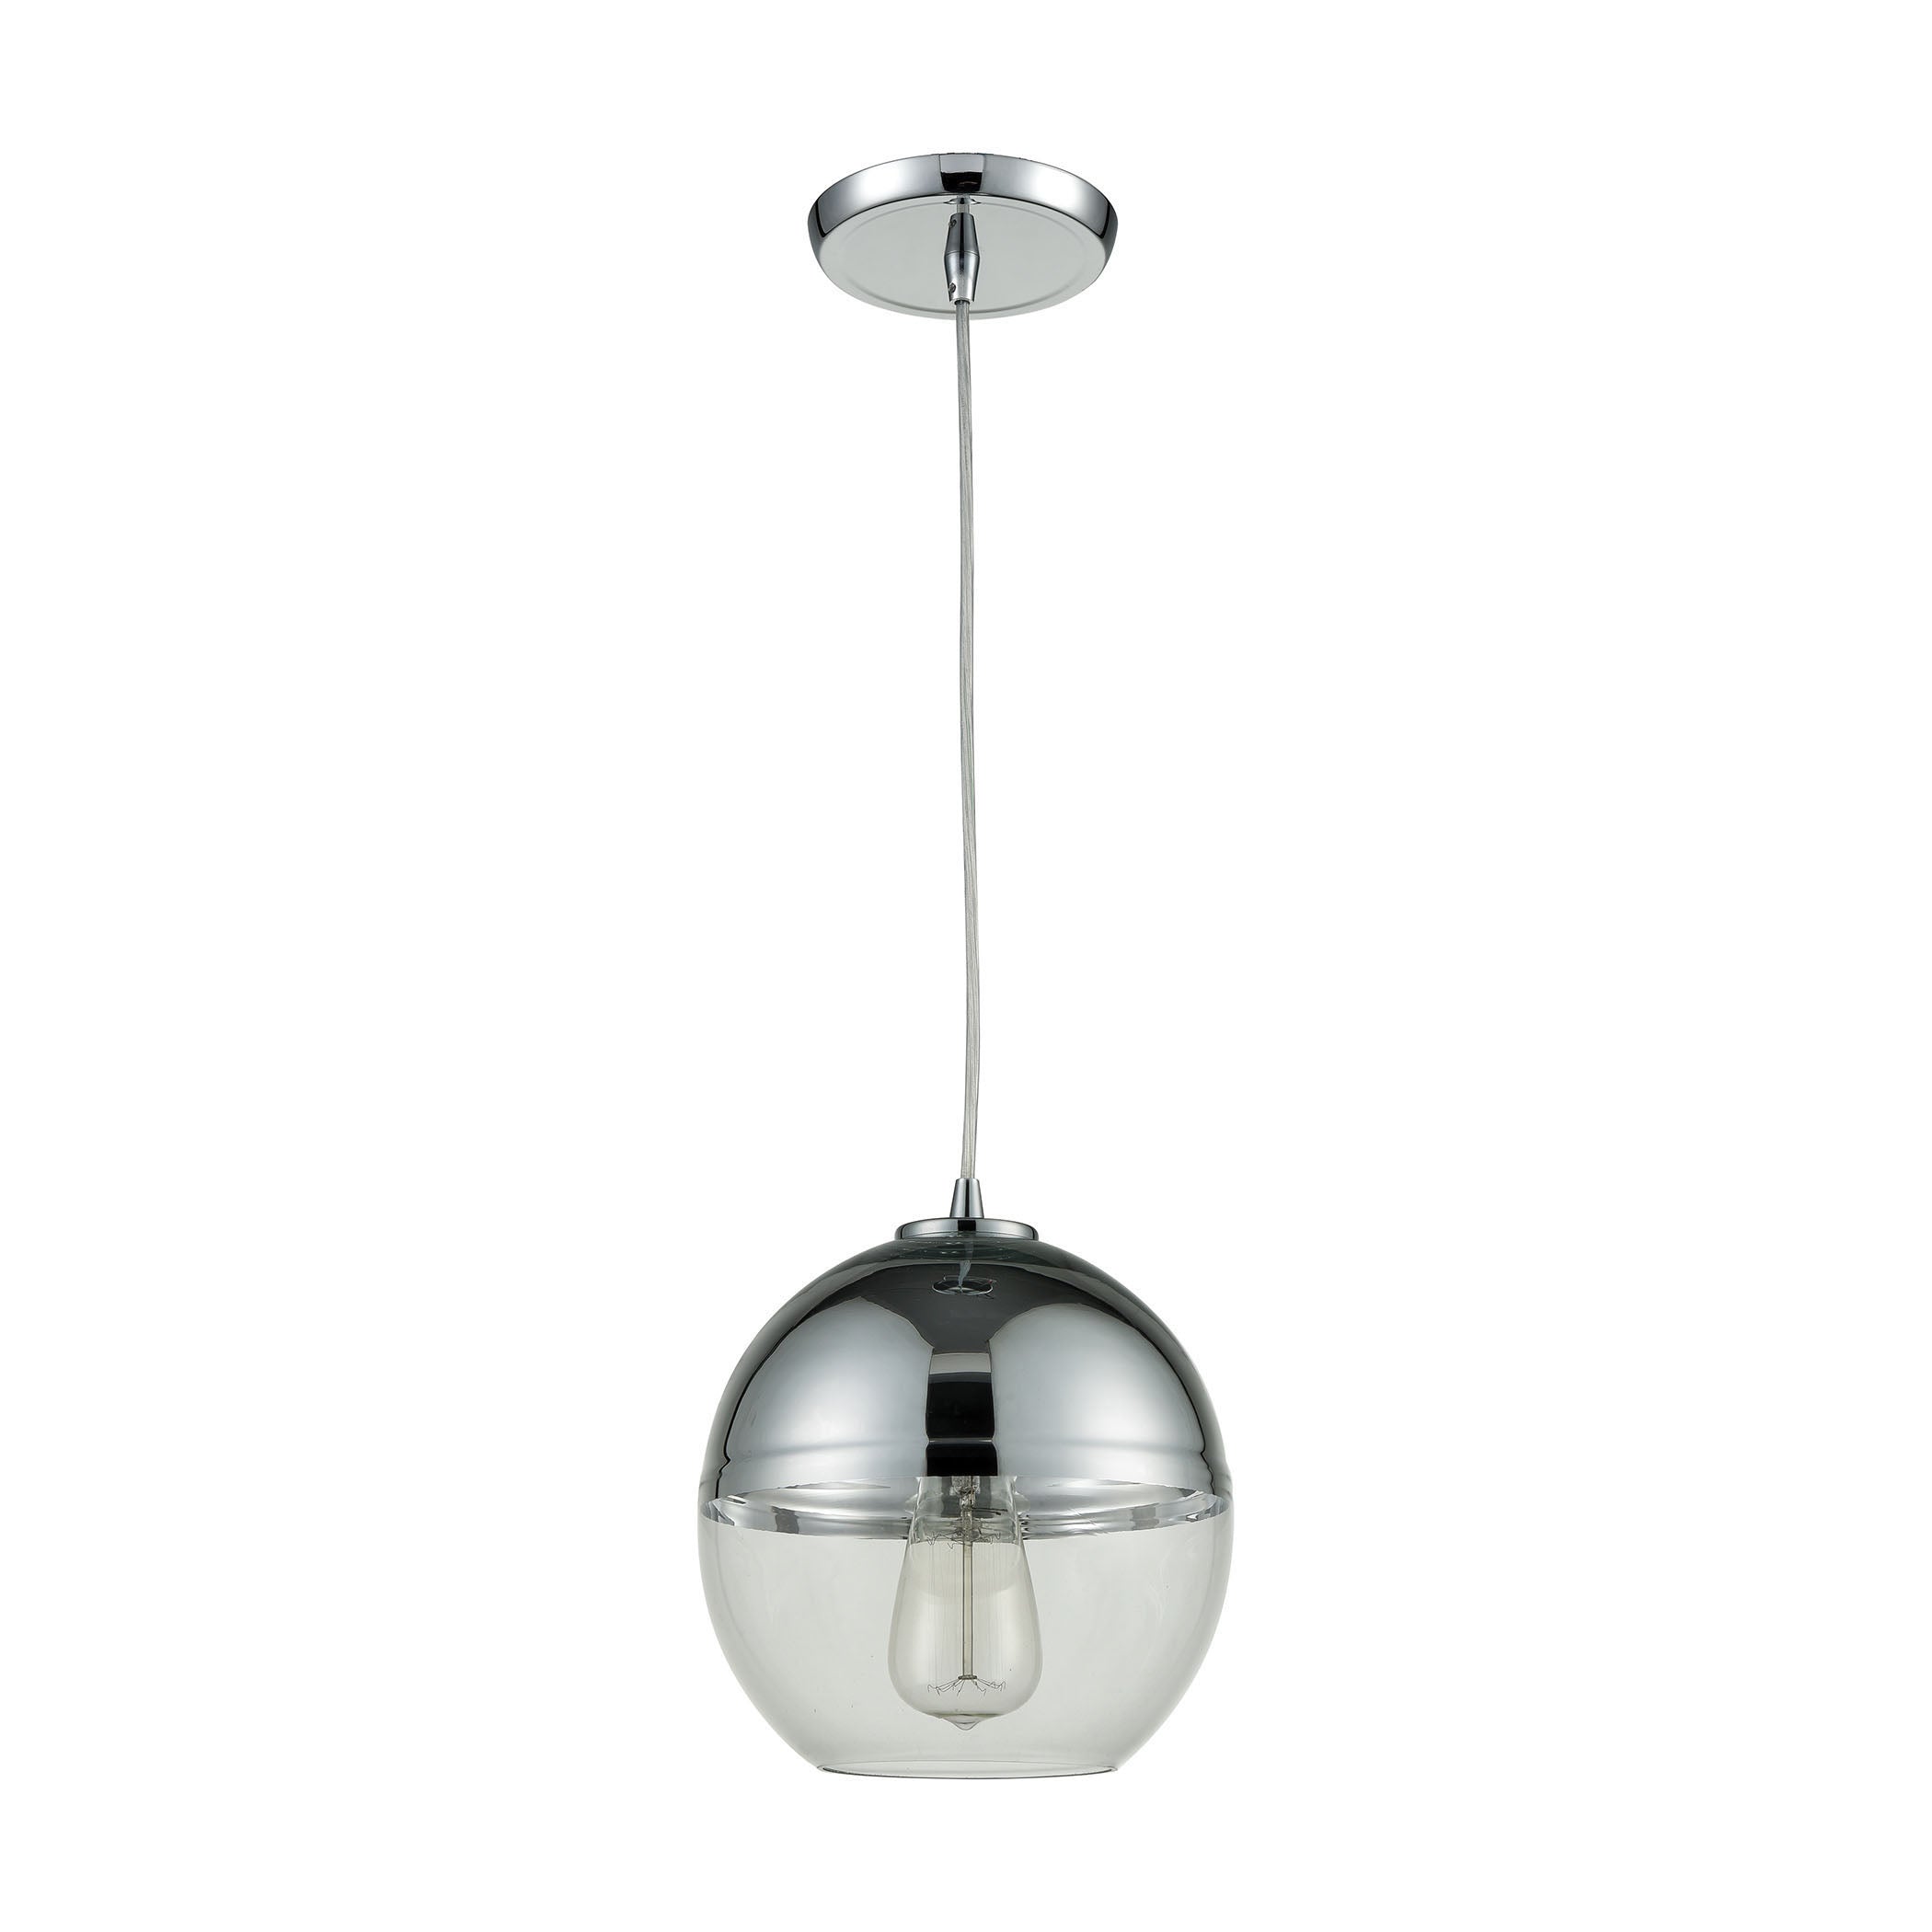 ELK Lighting 10492/1 Revelo 1-Light Mini Pendant in Polished Chrome with Clear and Chrome-plated Glass